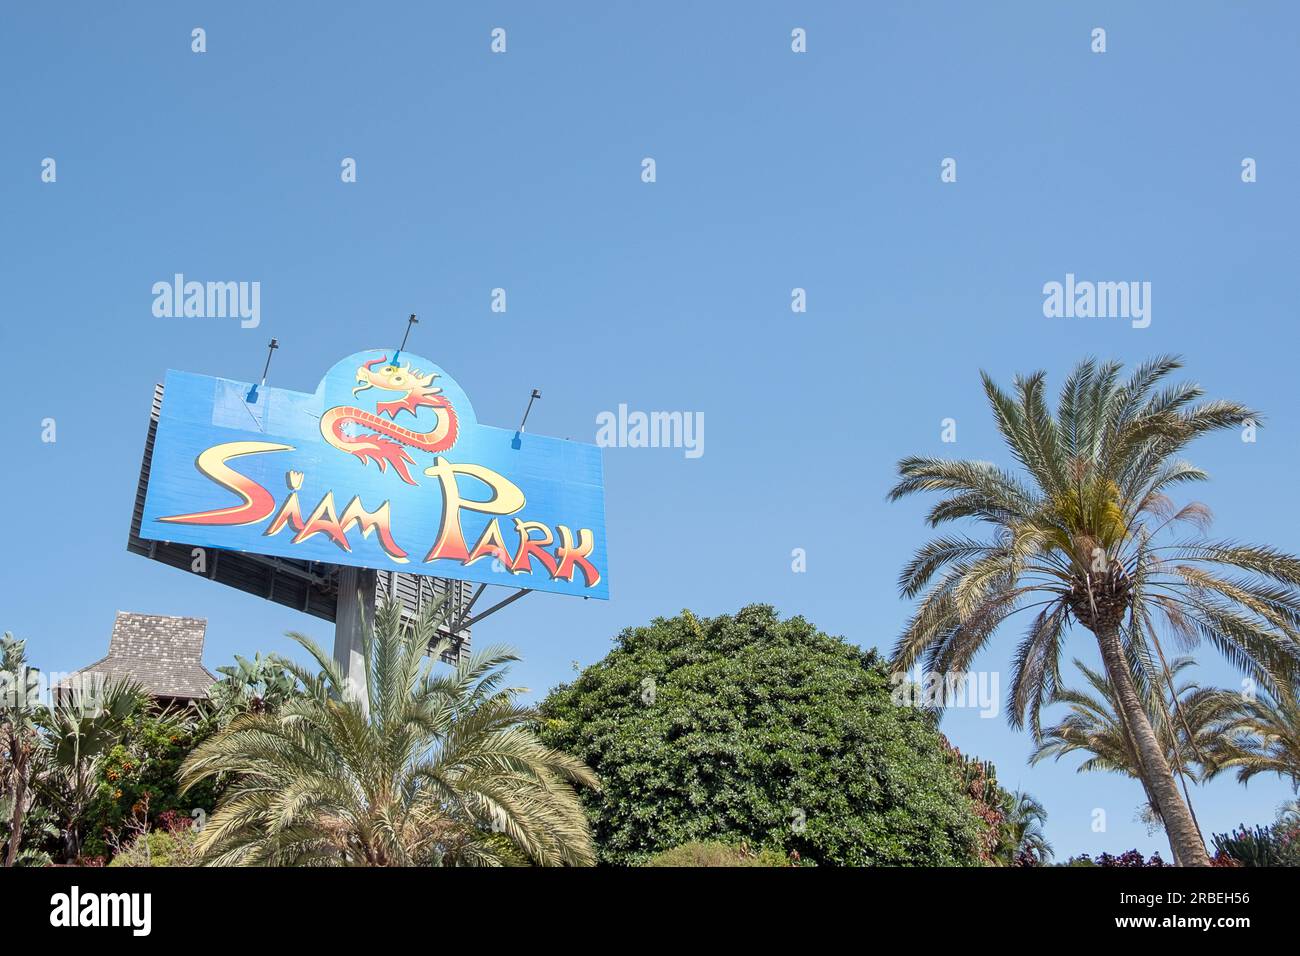 Sign of the renowned water park known for its unique Thai-inspired theme beloved by tourists for a large variety of activities, Siam Park, Tenerife Stock Photo